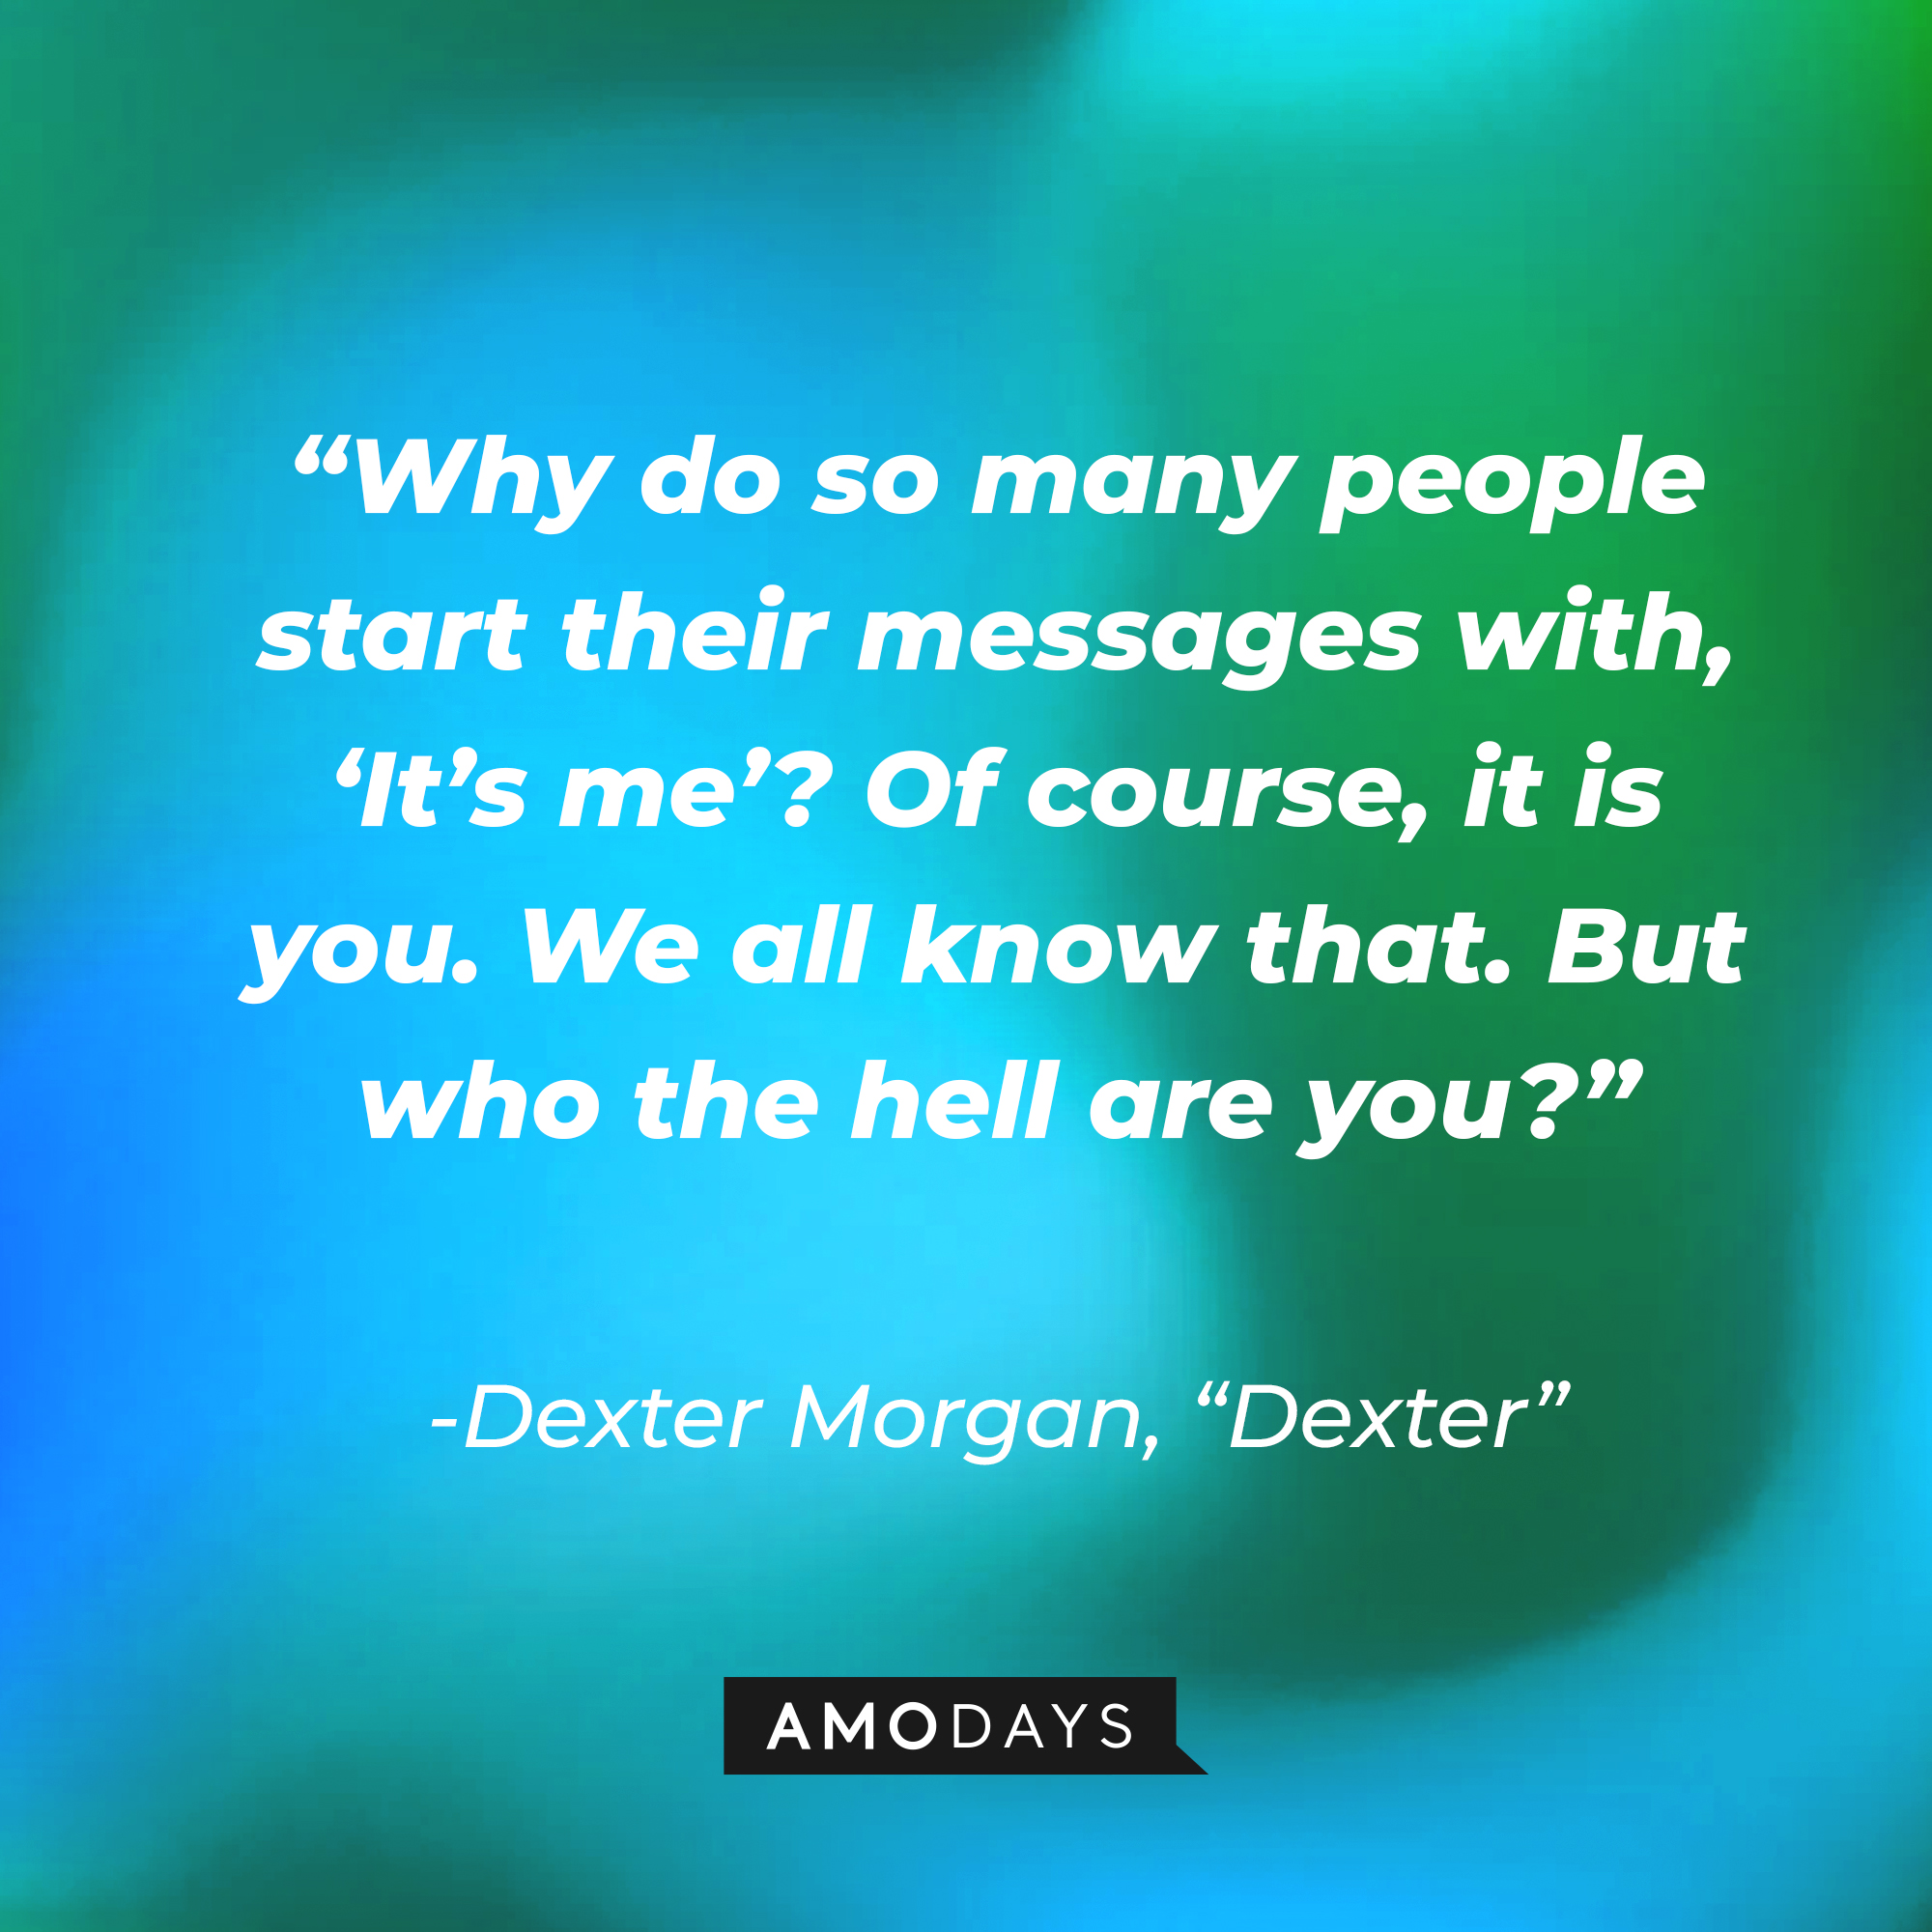 Dexter Morgan's quote from "Dexter:" "Why do so many people start their messages with, ‘It’s me’? Of course, it is you. We all know that. But who the hell are you?” | Source: AmoDays